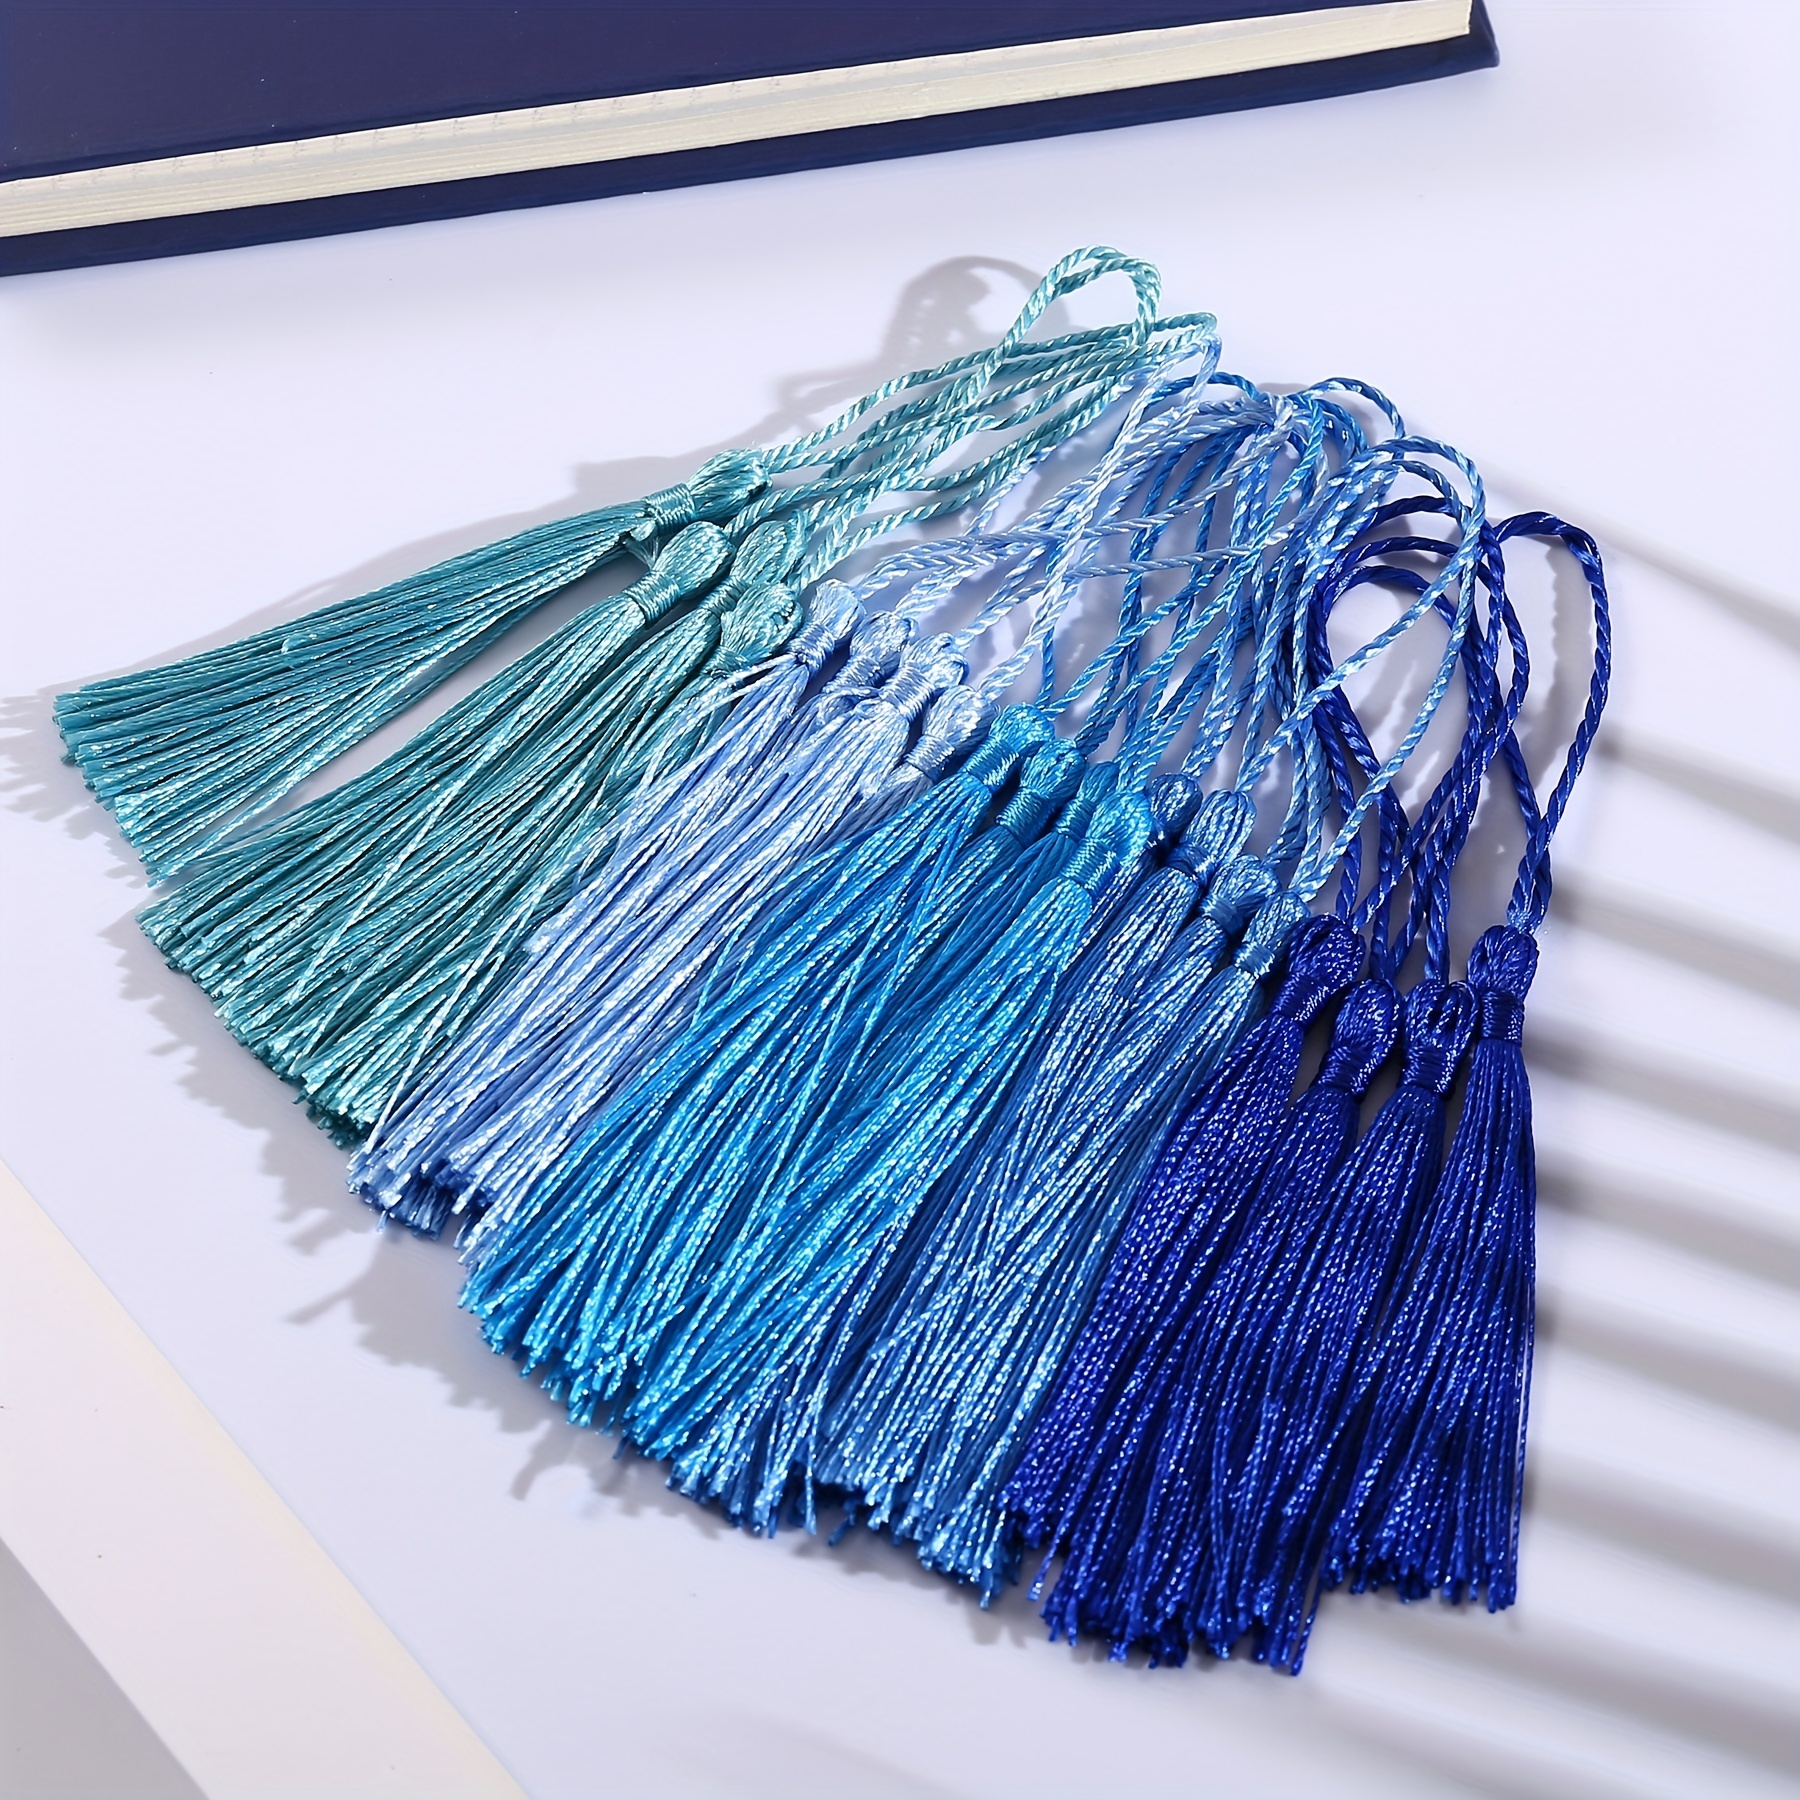  150 Pieces 13CM Bookmark Tassels Silky Craft Tassels for  Jewelry Making, Bookmarks,Graduation DIY Projects, 25 Colors